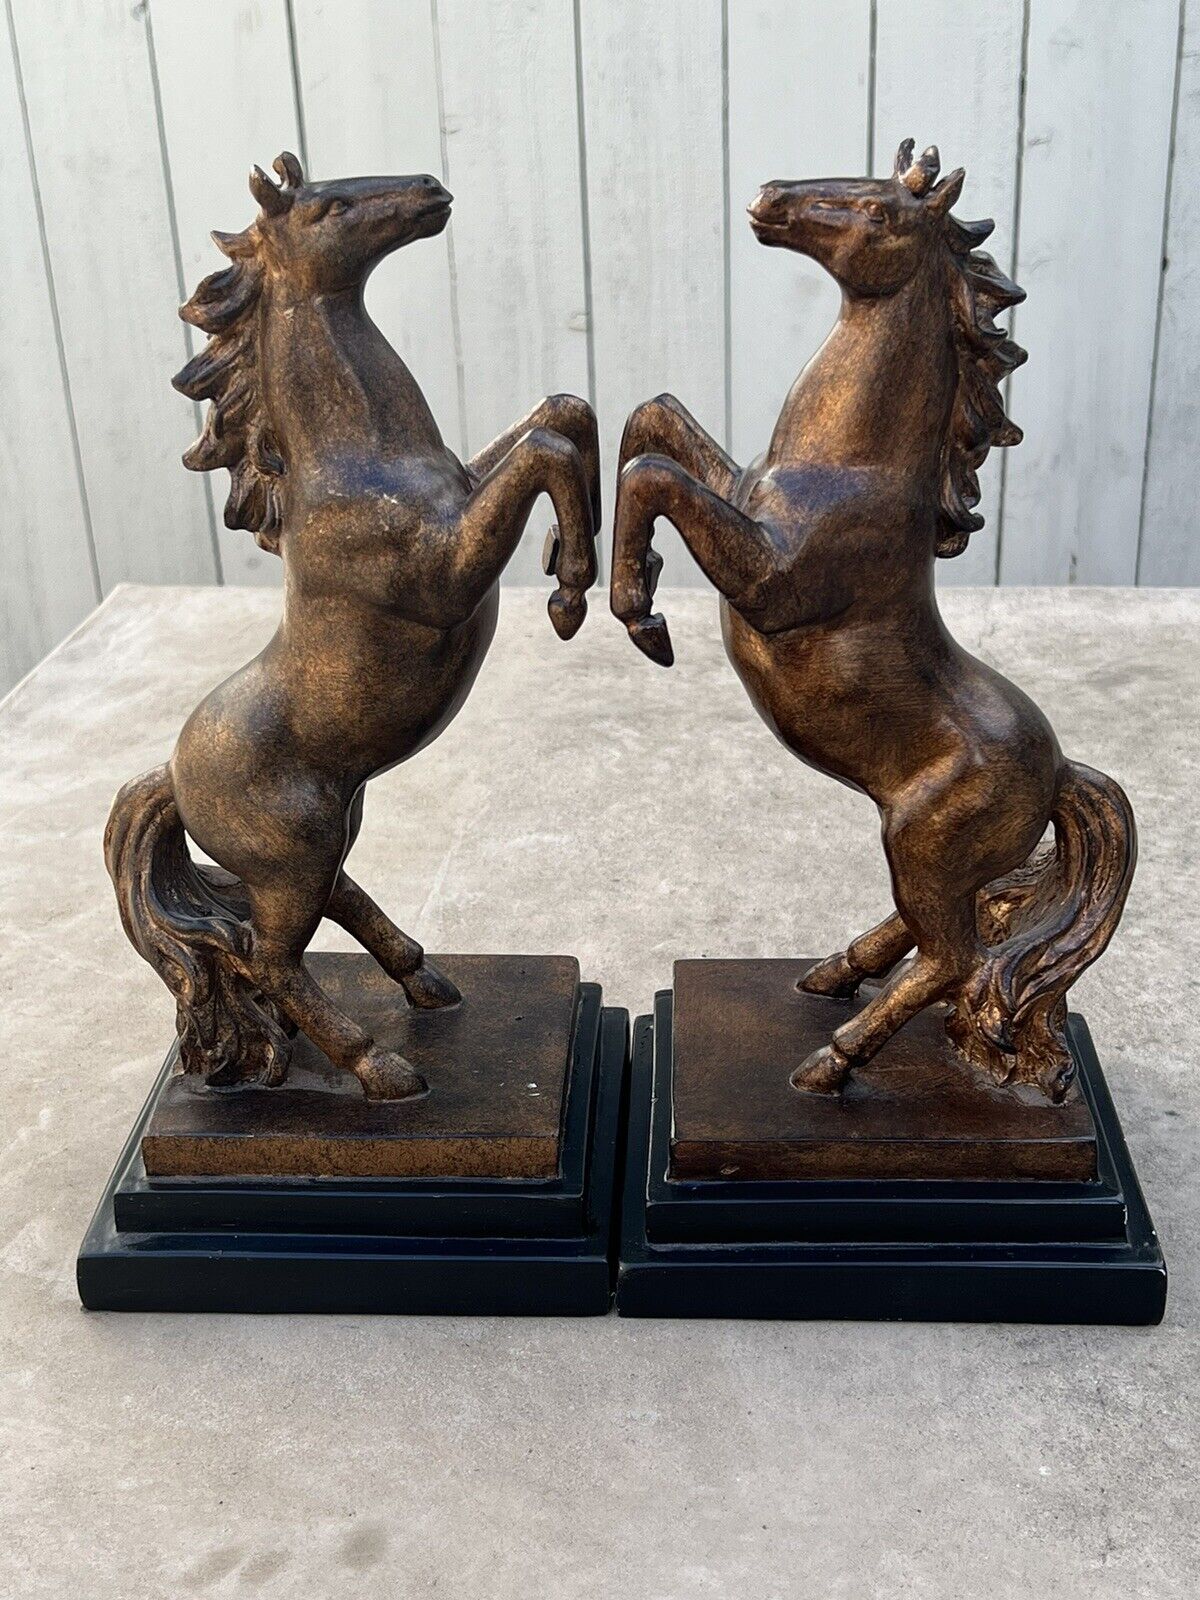 Rare Donald Trump Home Collection 2008 Pair Of Horses Sculptures Figurine